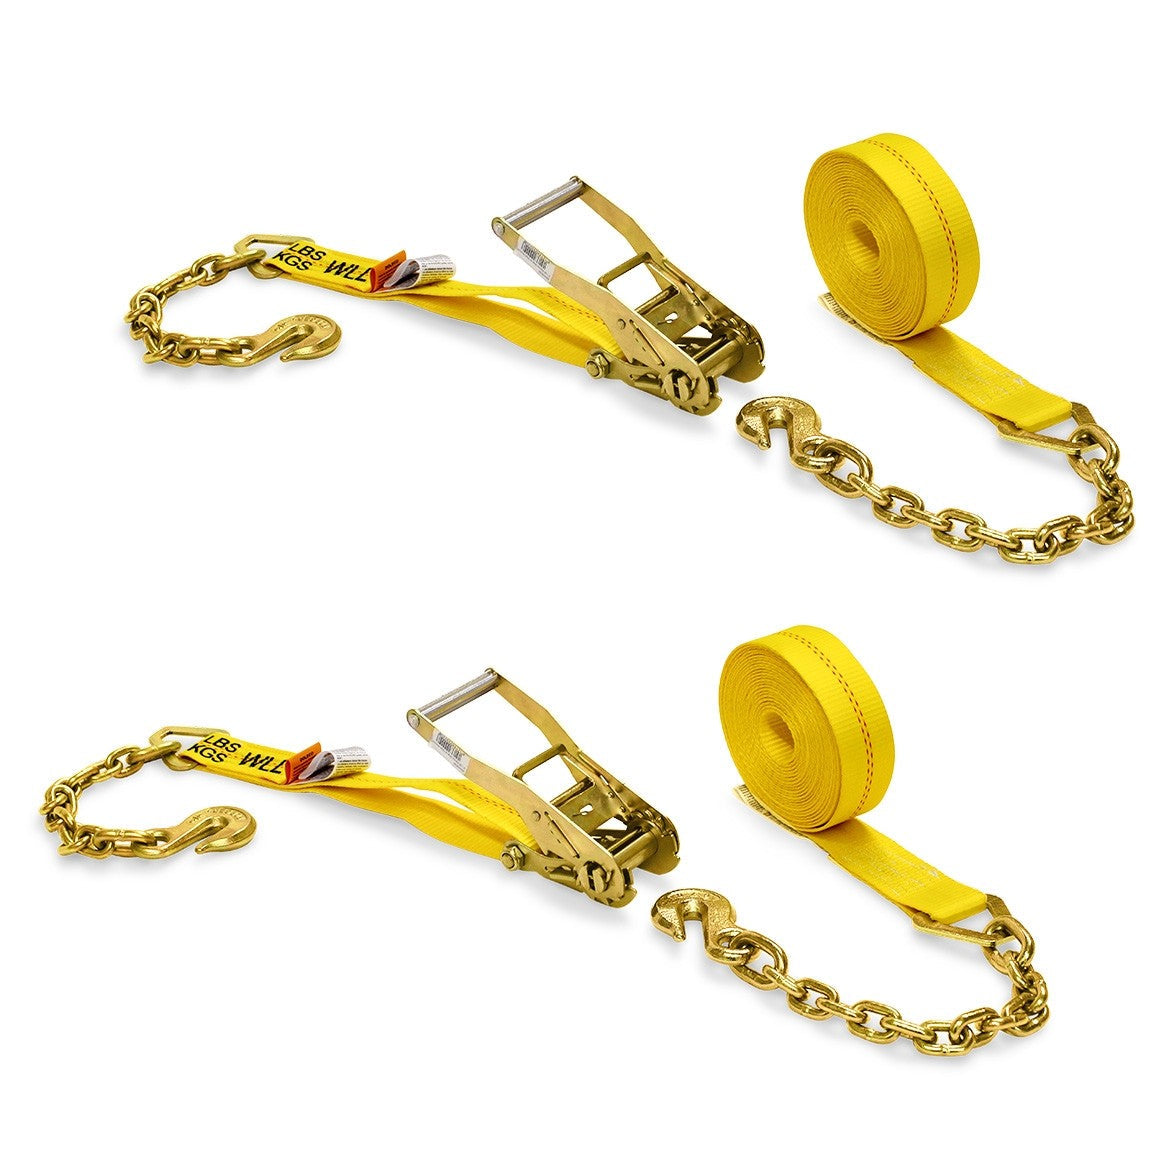 DKG-304 Yellow Heavy Duty Double J Hook Wheel Strap with Ratchet - Over  Tire Wire Hook Car Hauler Tie Down - Auto Transporter Trailer Strap with  Steel Ratchet - Working Load Limit